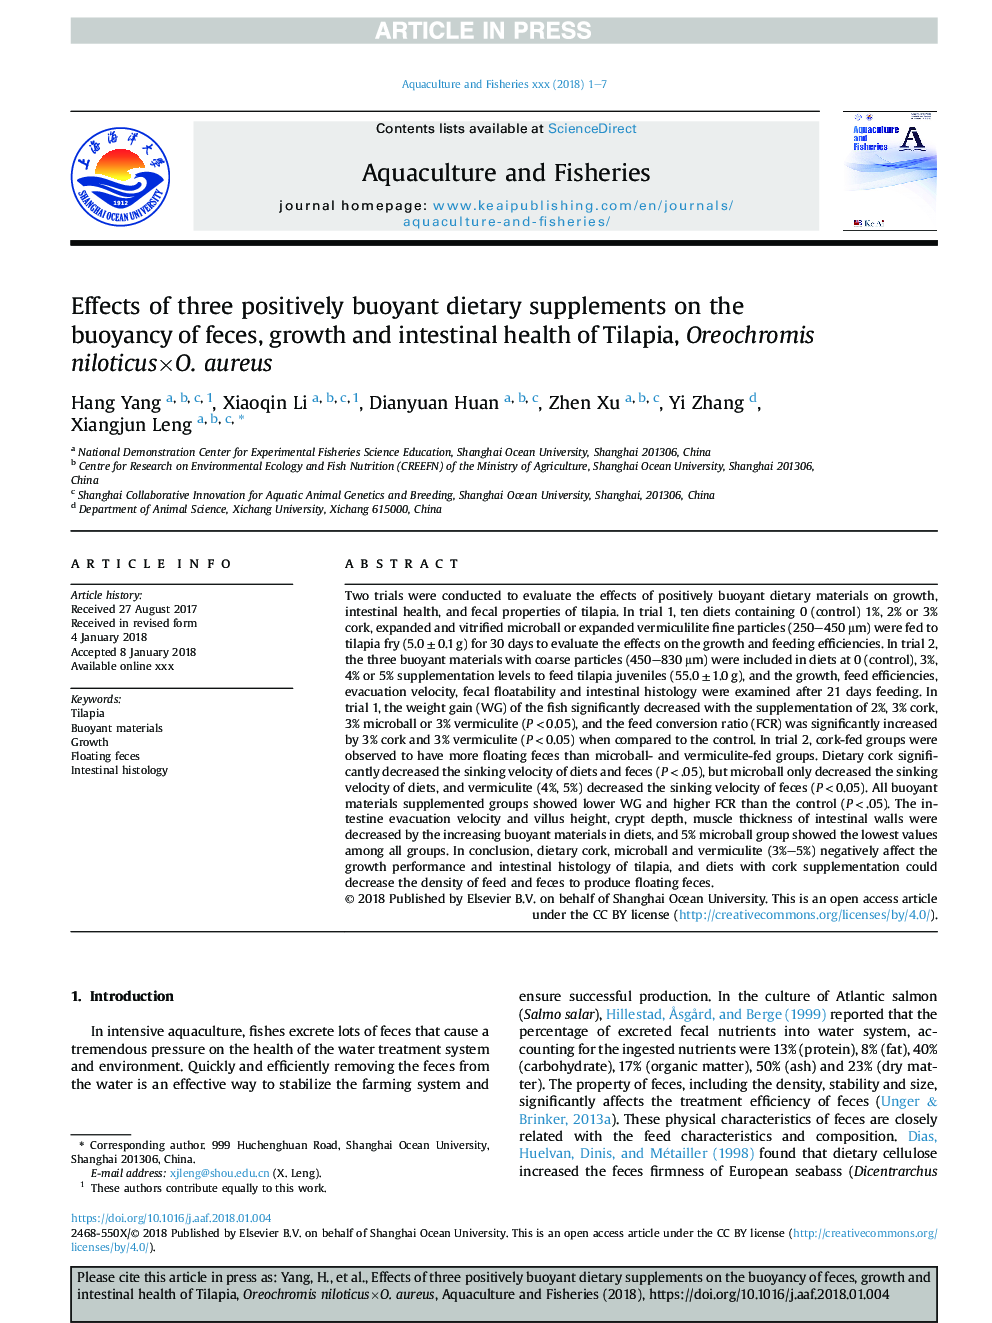 Effects of three positively buoyant dietary supplements on the buoyancy of feces, growth and intestinal health of Tilapia, Oreochromis niloticusÃO. aureus